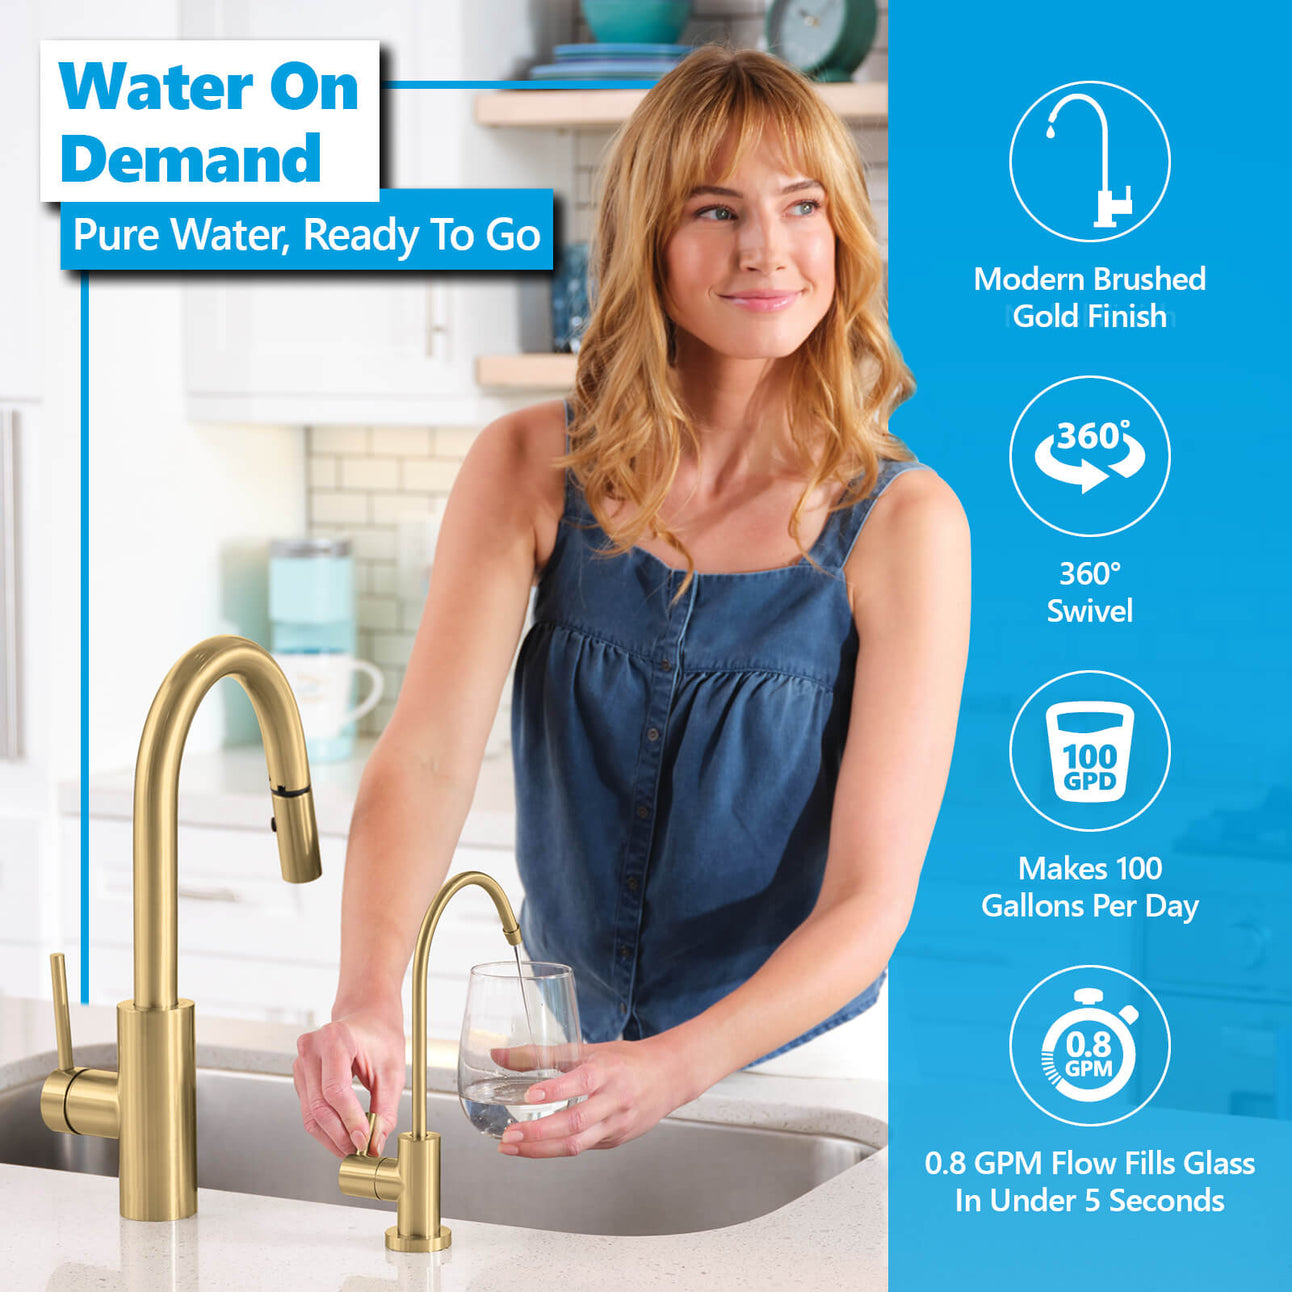 Alkaline RO System with modern brushed gold faucet